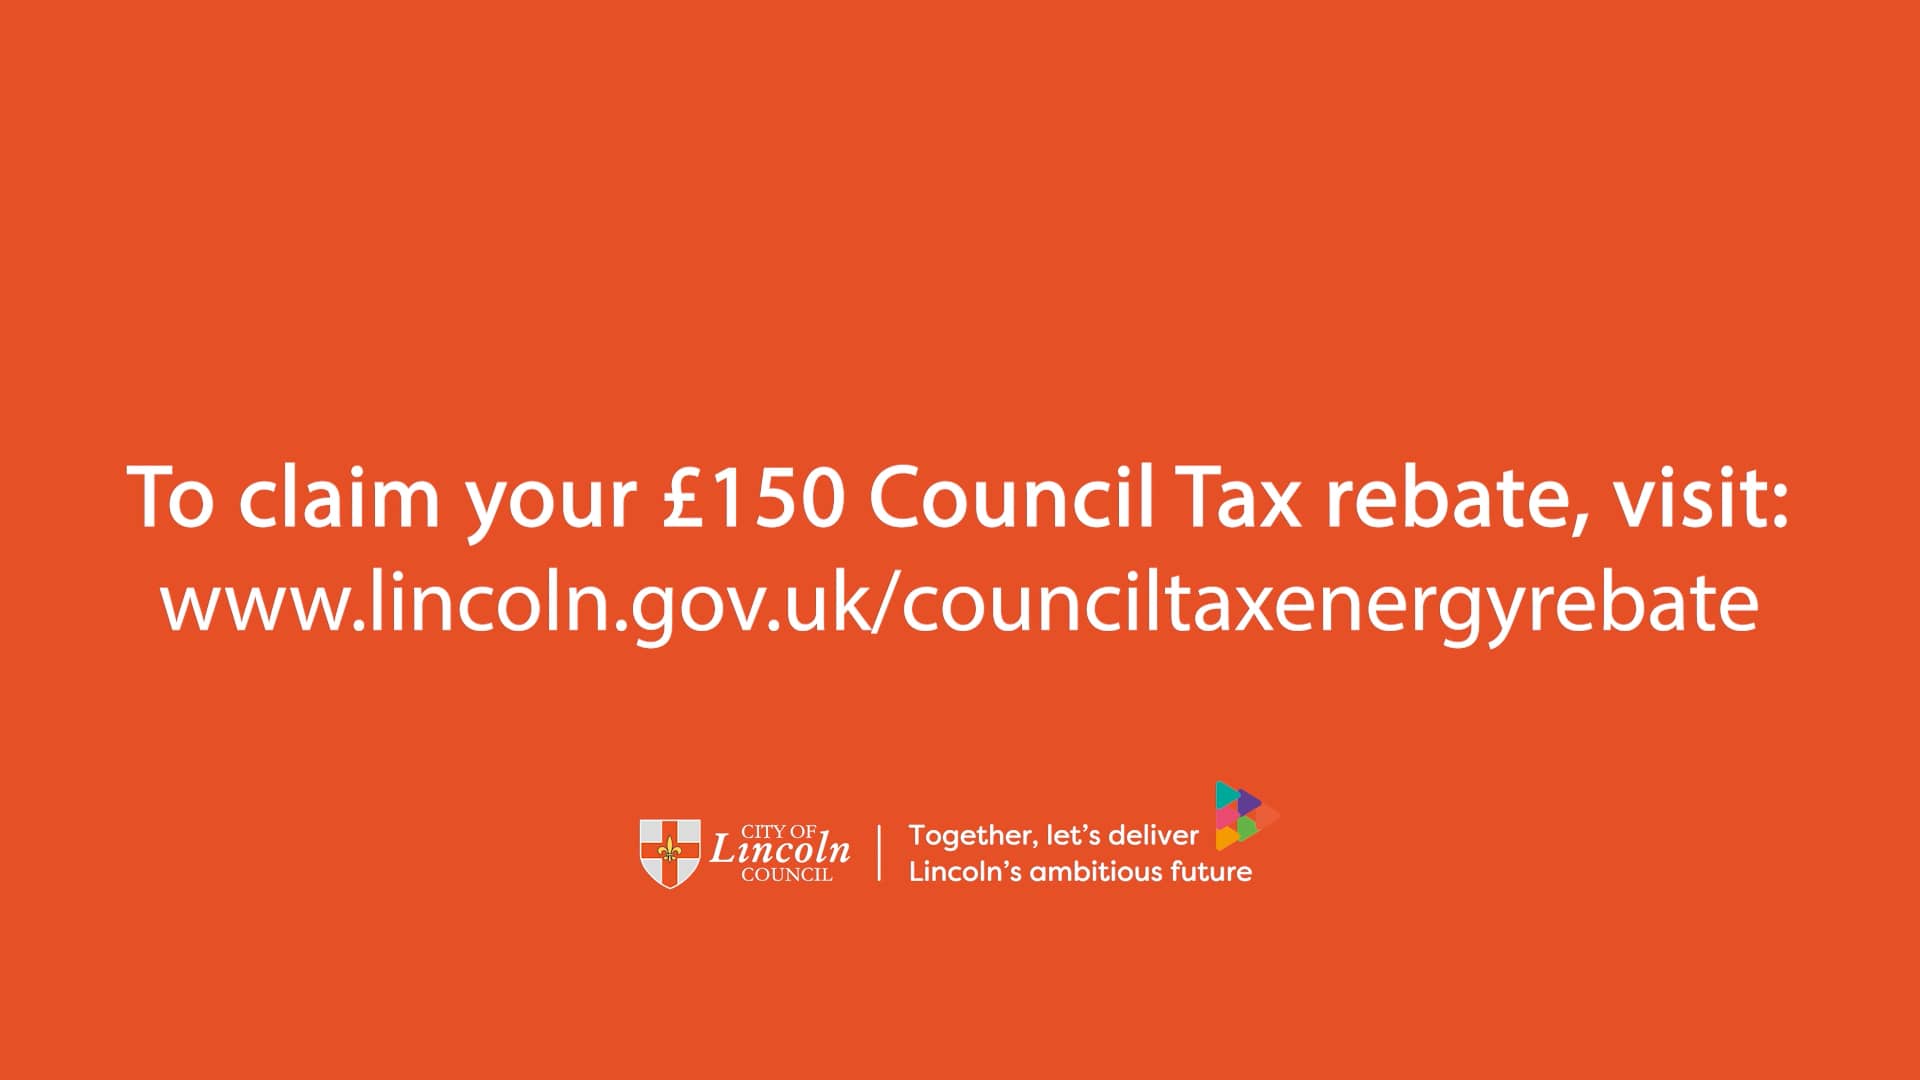 a-guide-to-claiming-your-city-of-lincoln-150-council-tax-rebate-on-vimeo